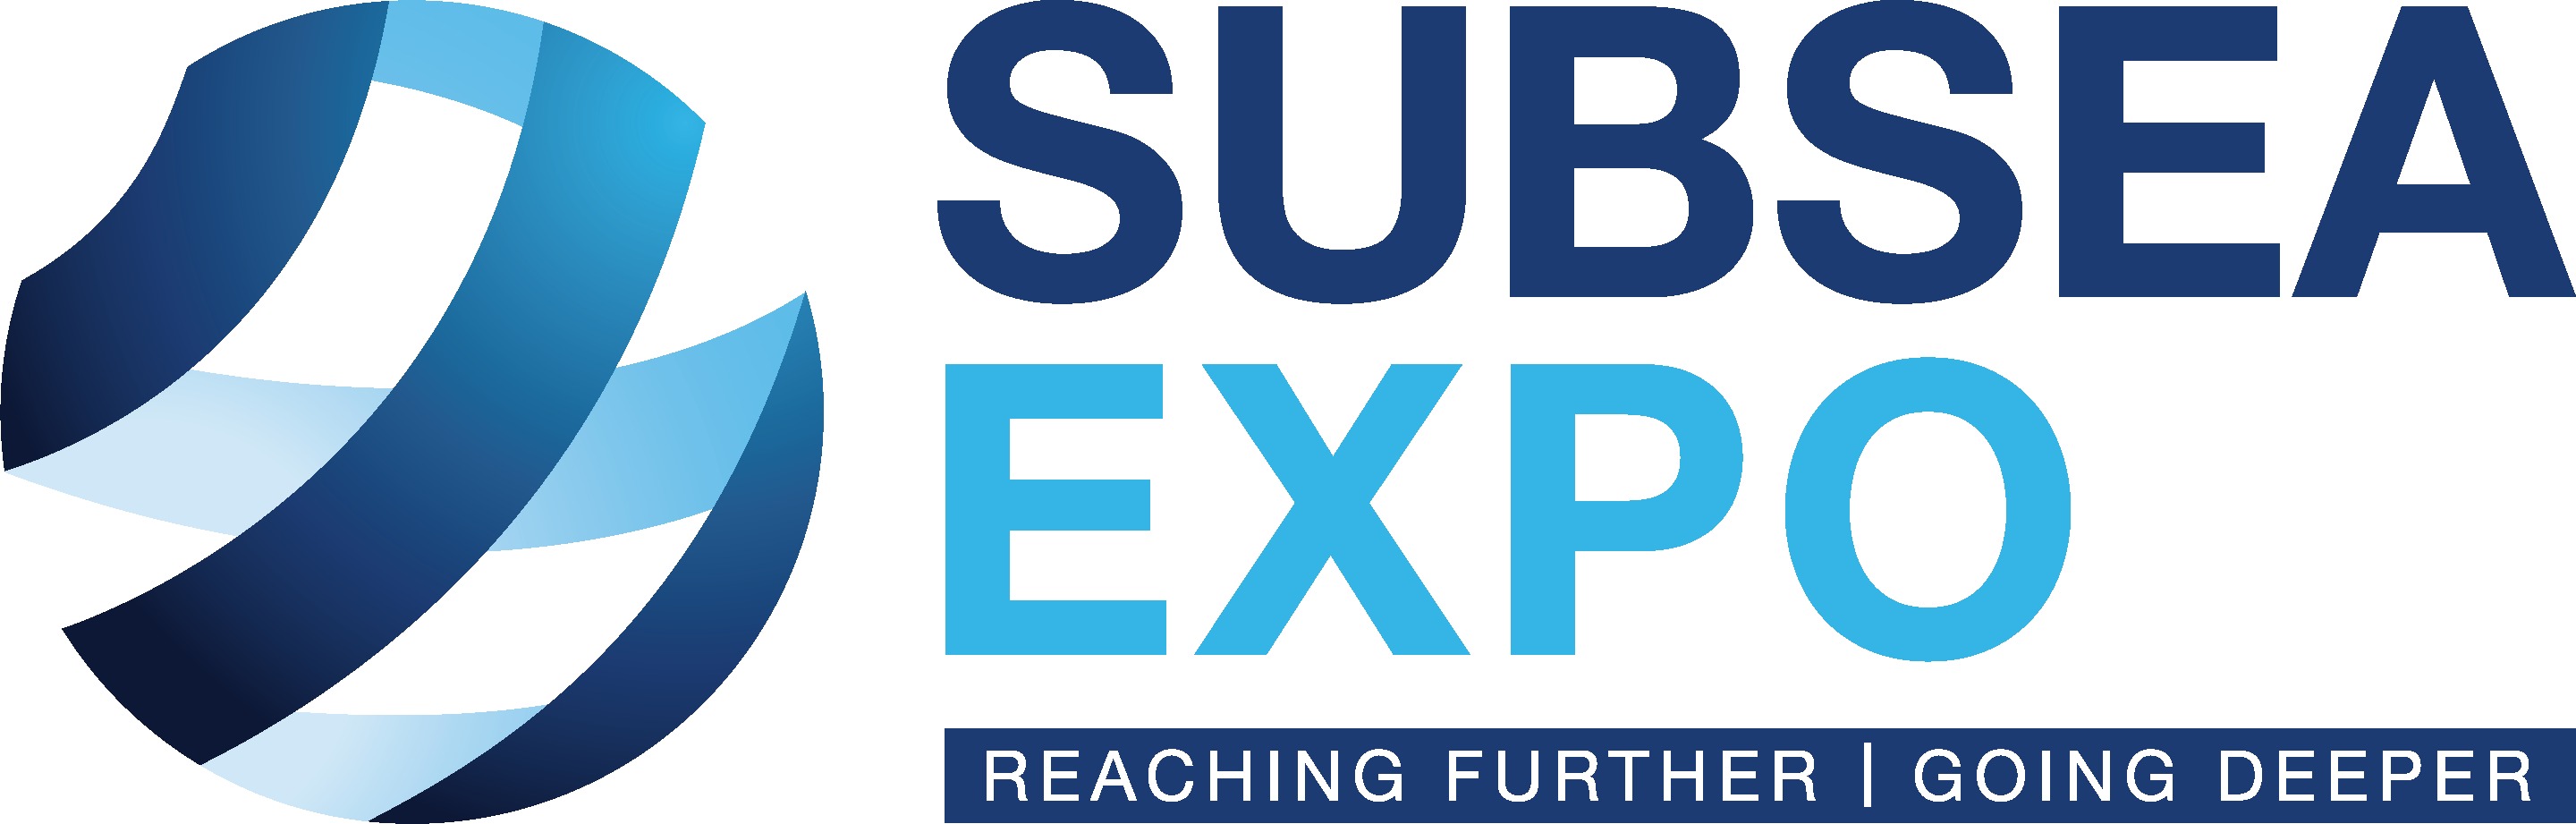 Bignall to attend Subsea Expo